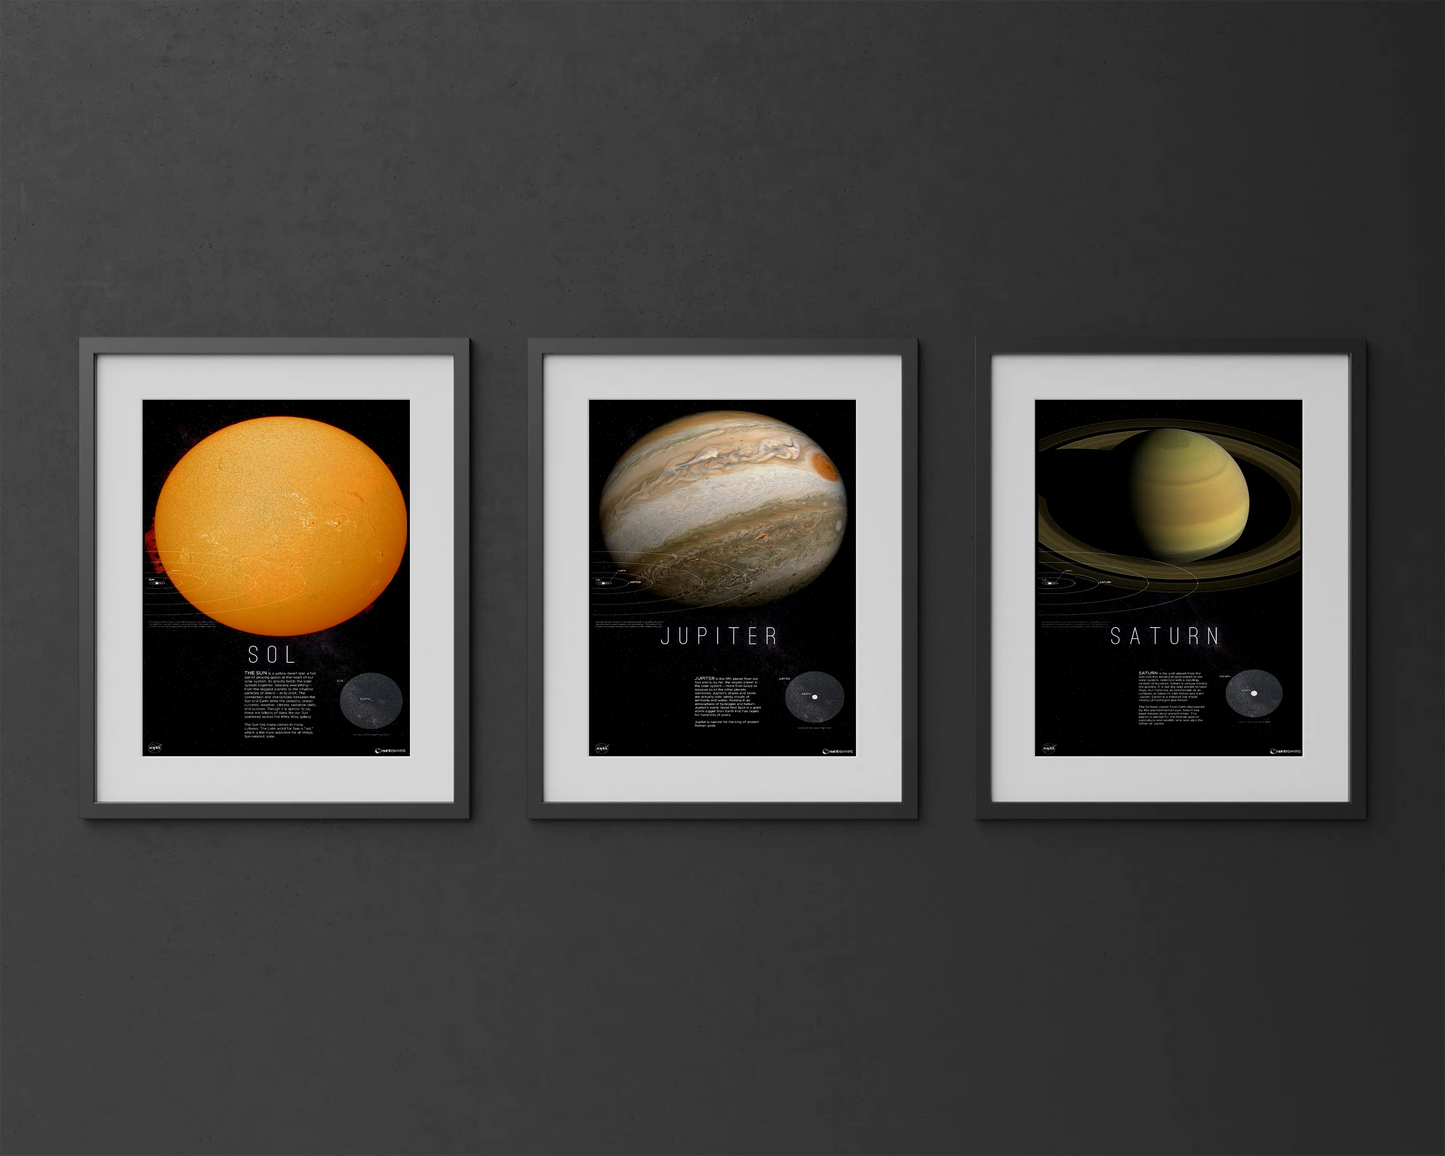  Sun | Jupiter | Saturn |Rocket Blueprint Posters | The image displays three framed posters on a dark background, each featuring an image and description of the Sun, Jupiter, and Saturn, with their names prominently labeled below the images.